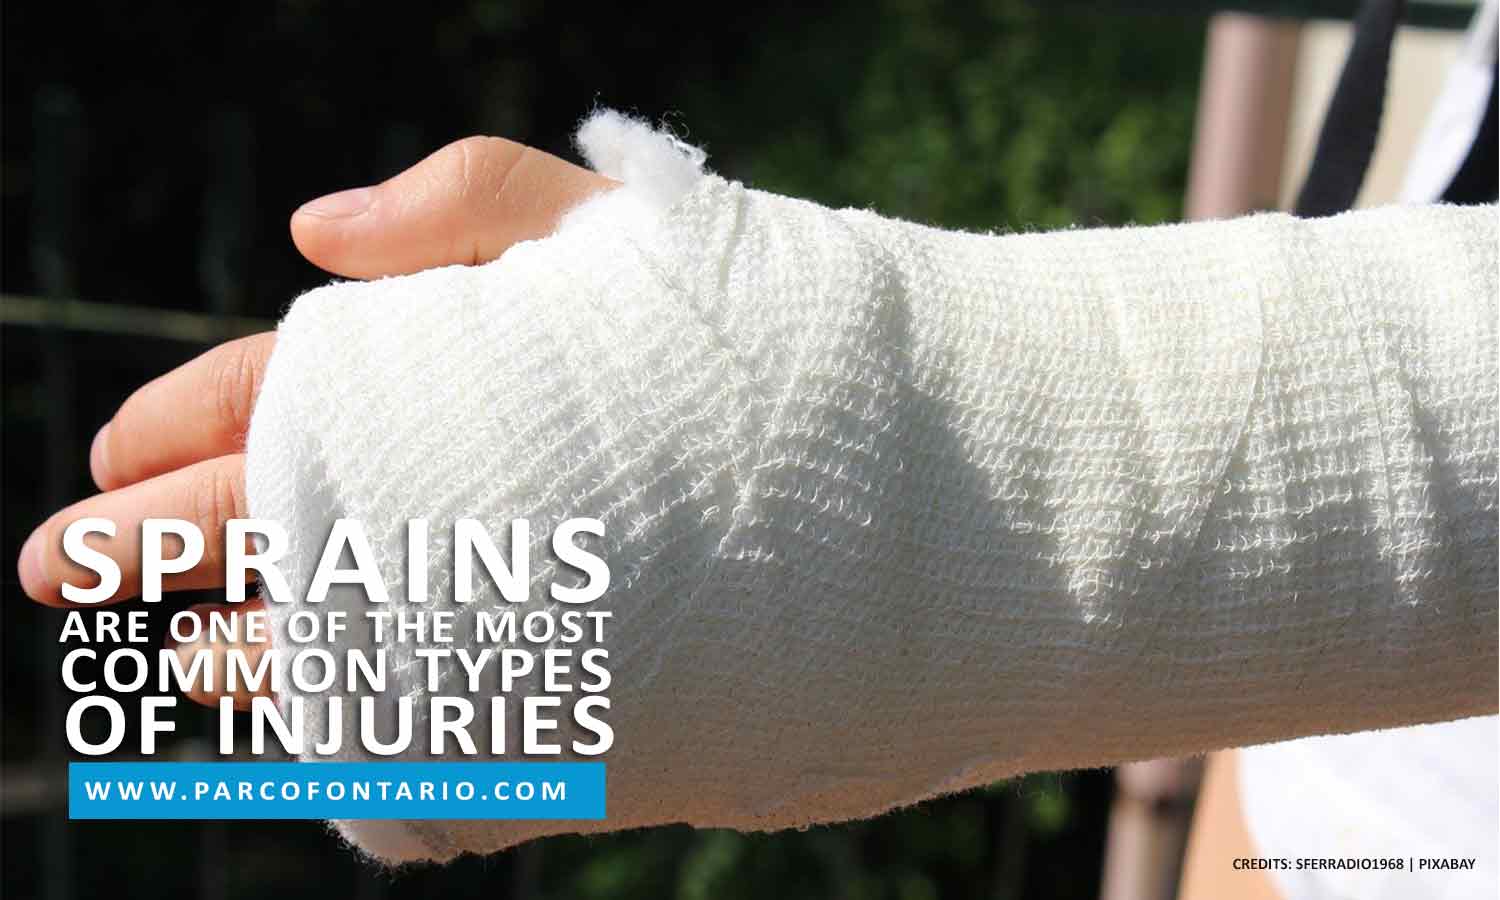 Sprains are one of the most common types of injuries